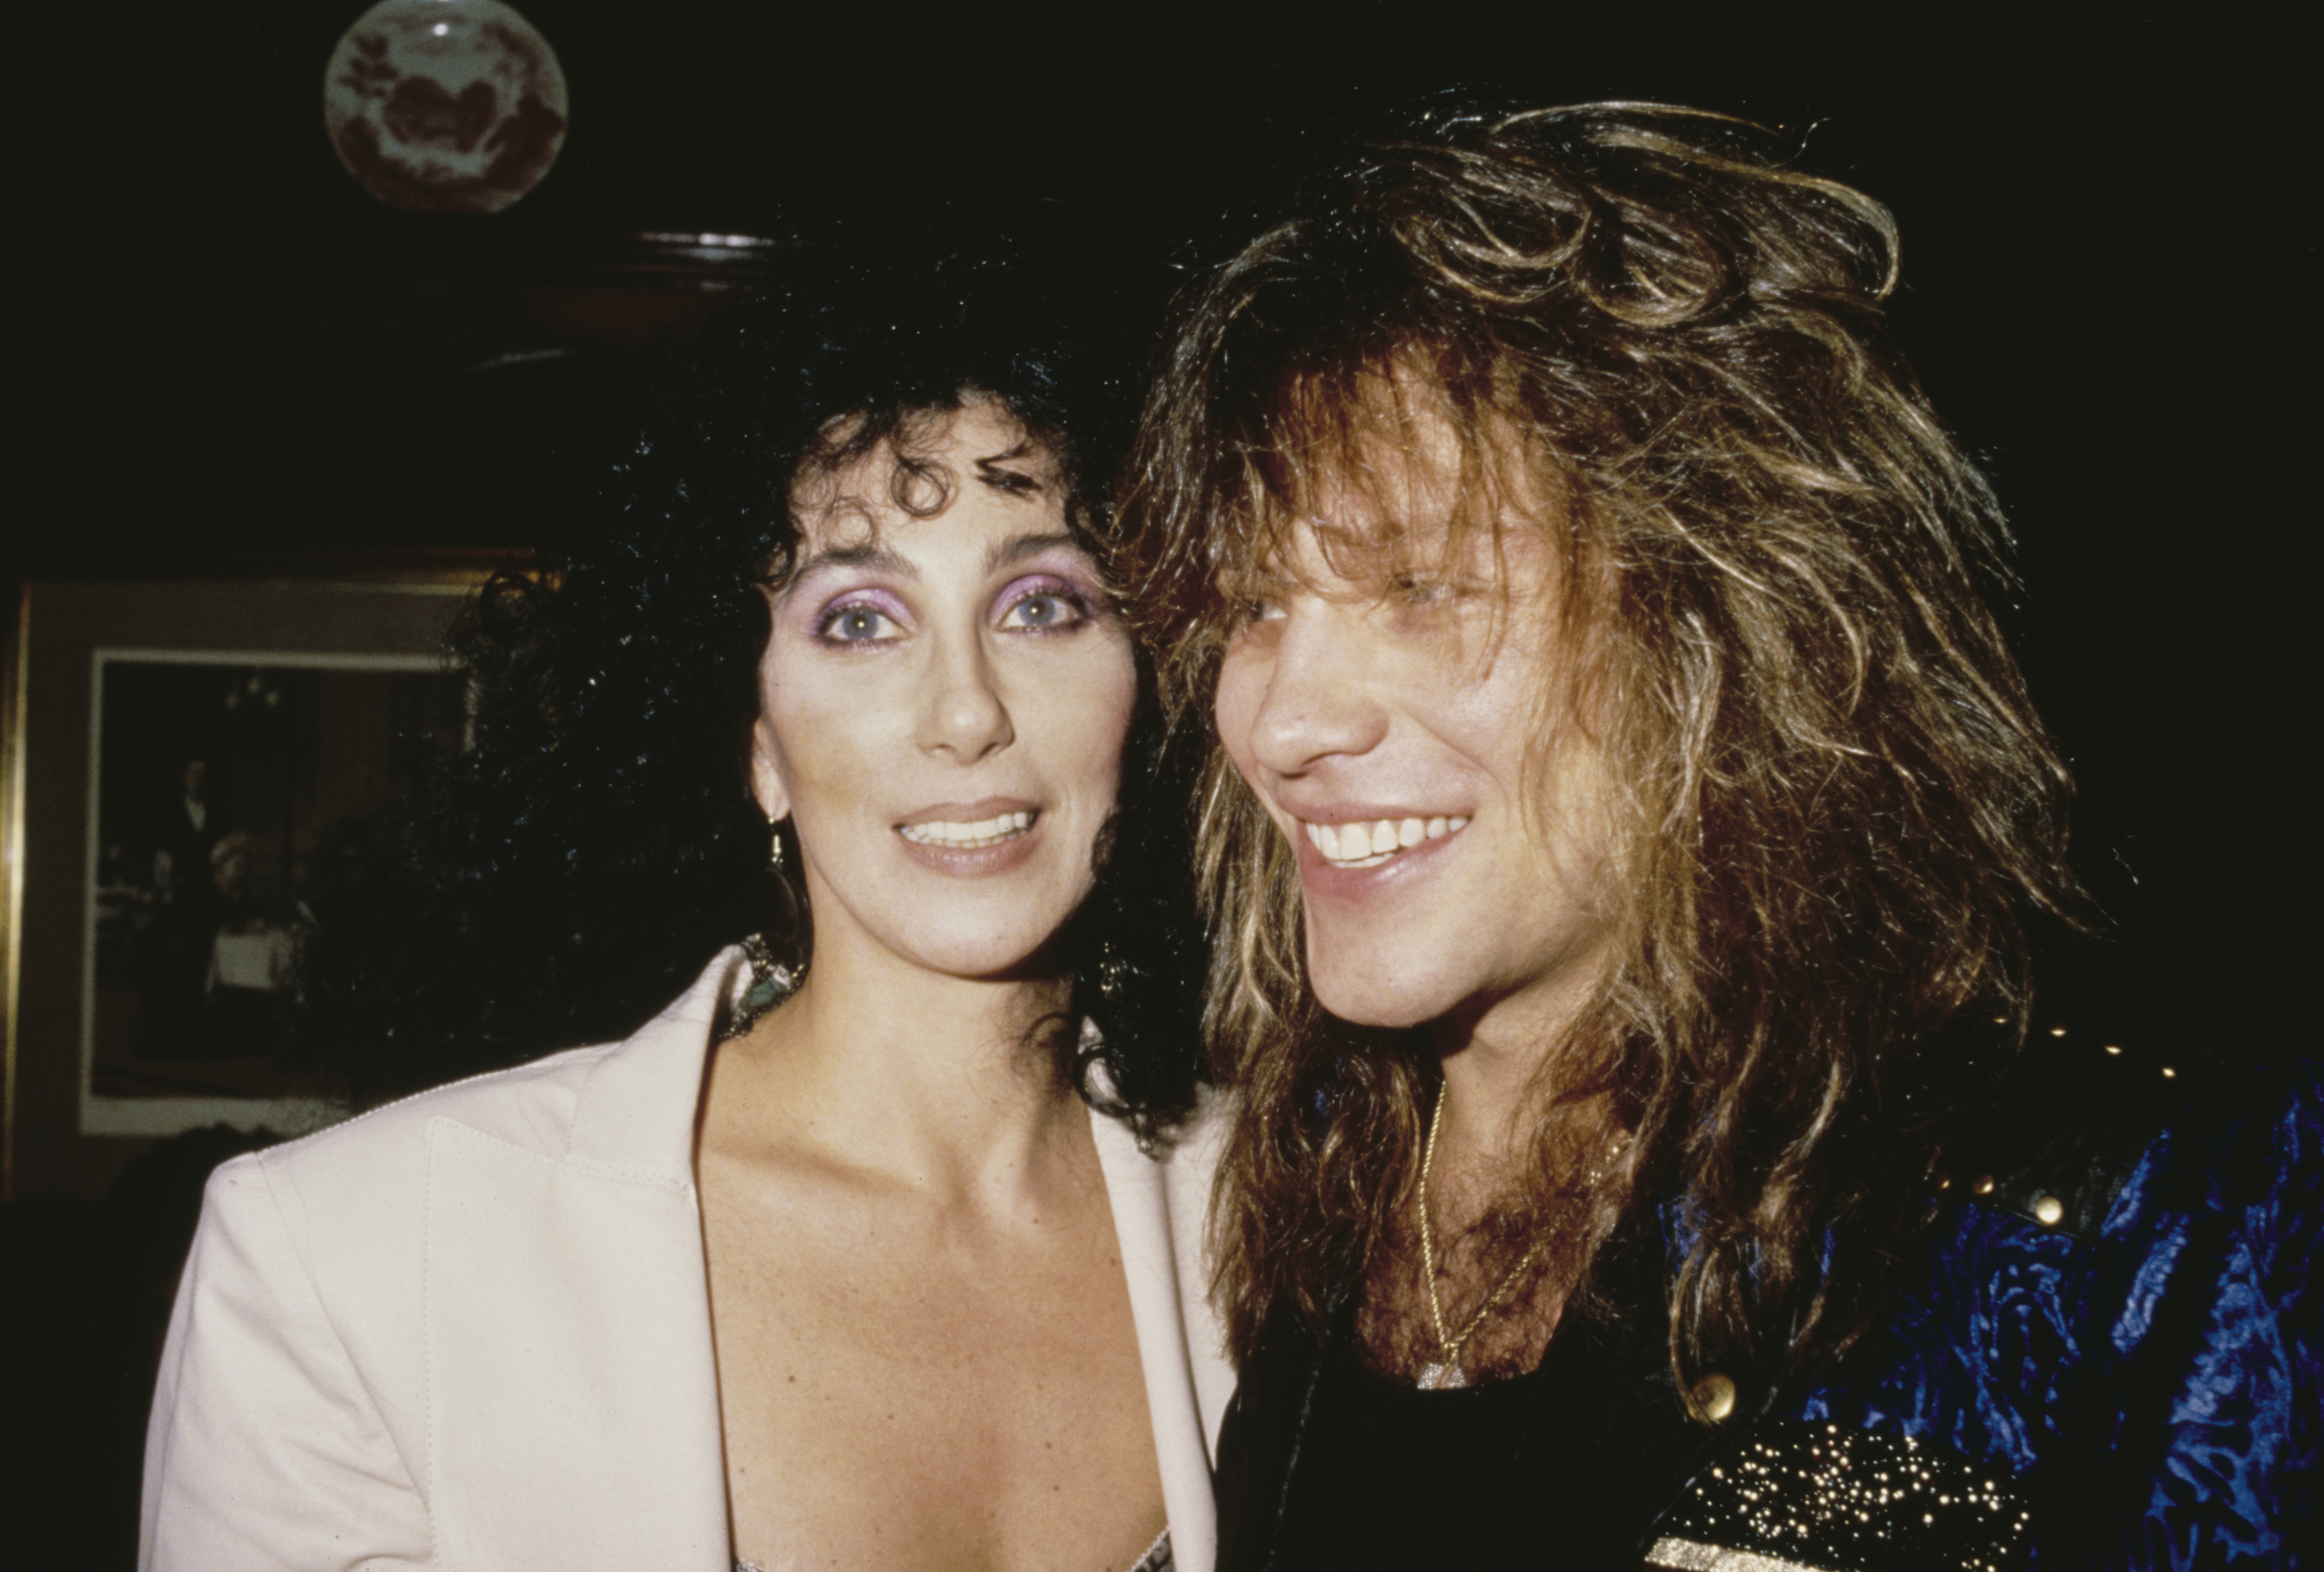 Cher and Jon Bon Jovi at the 15th Annual American Music Awards, held at the Shrine Auditorium in Los Angeles, California on January 25, 1988 | Source: Getty Images